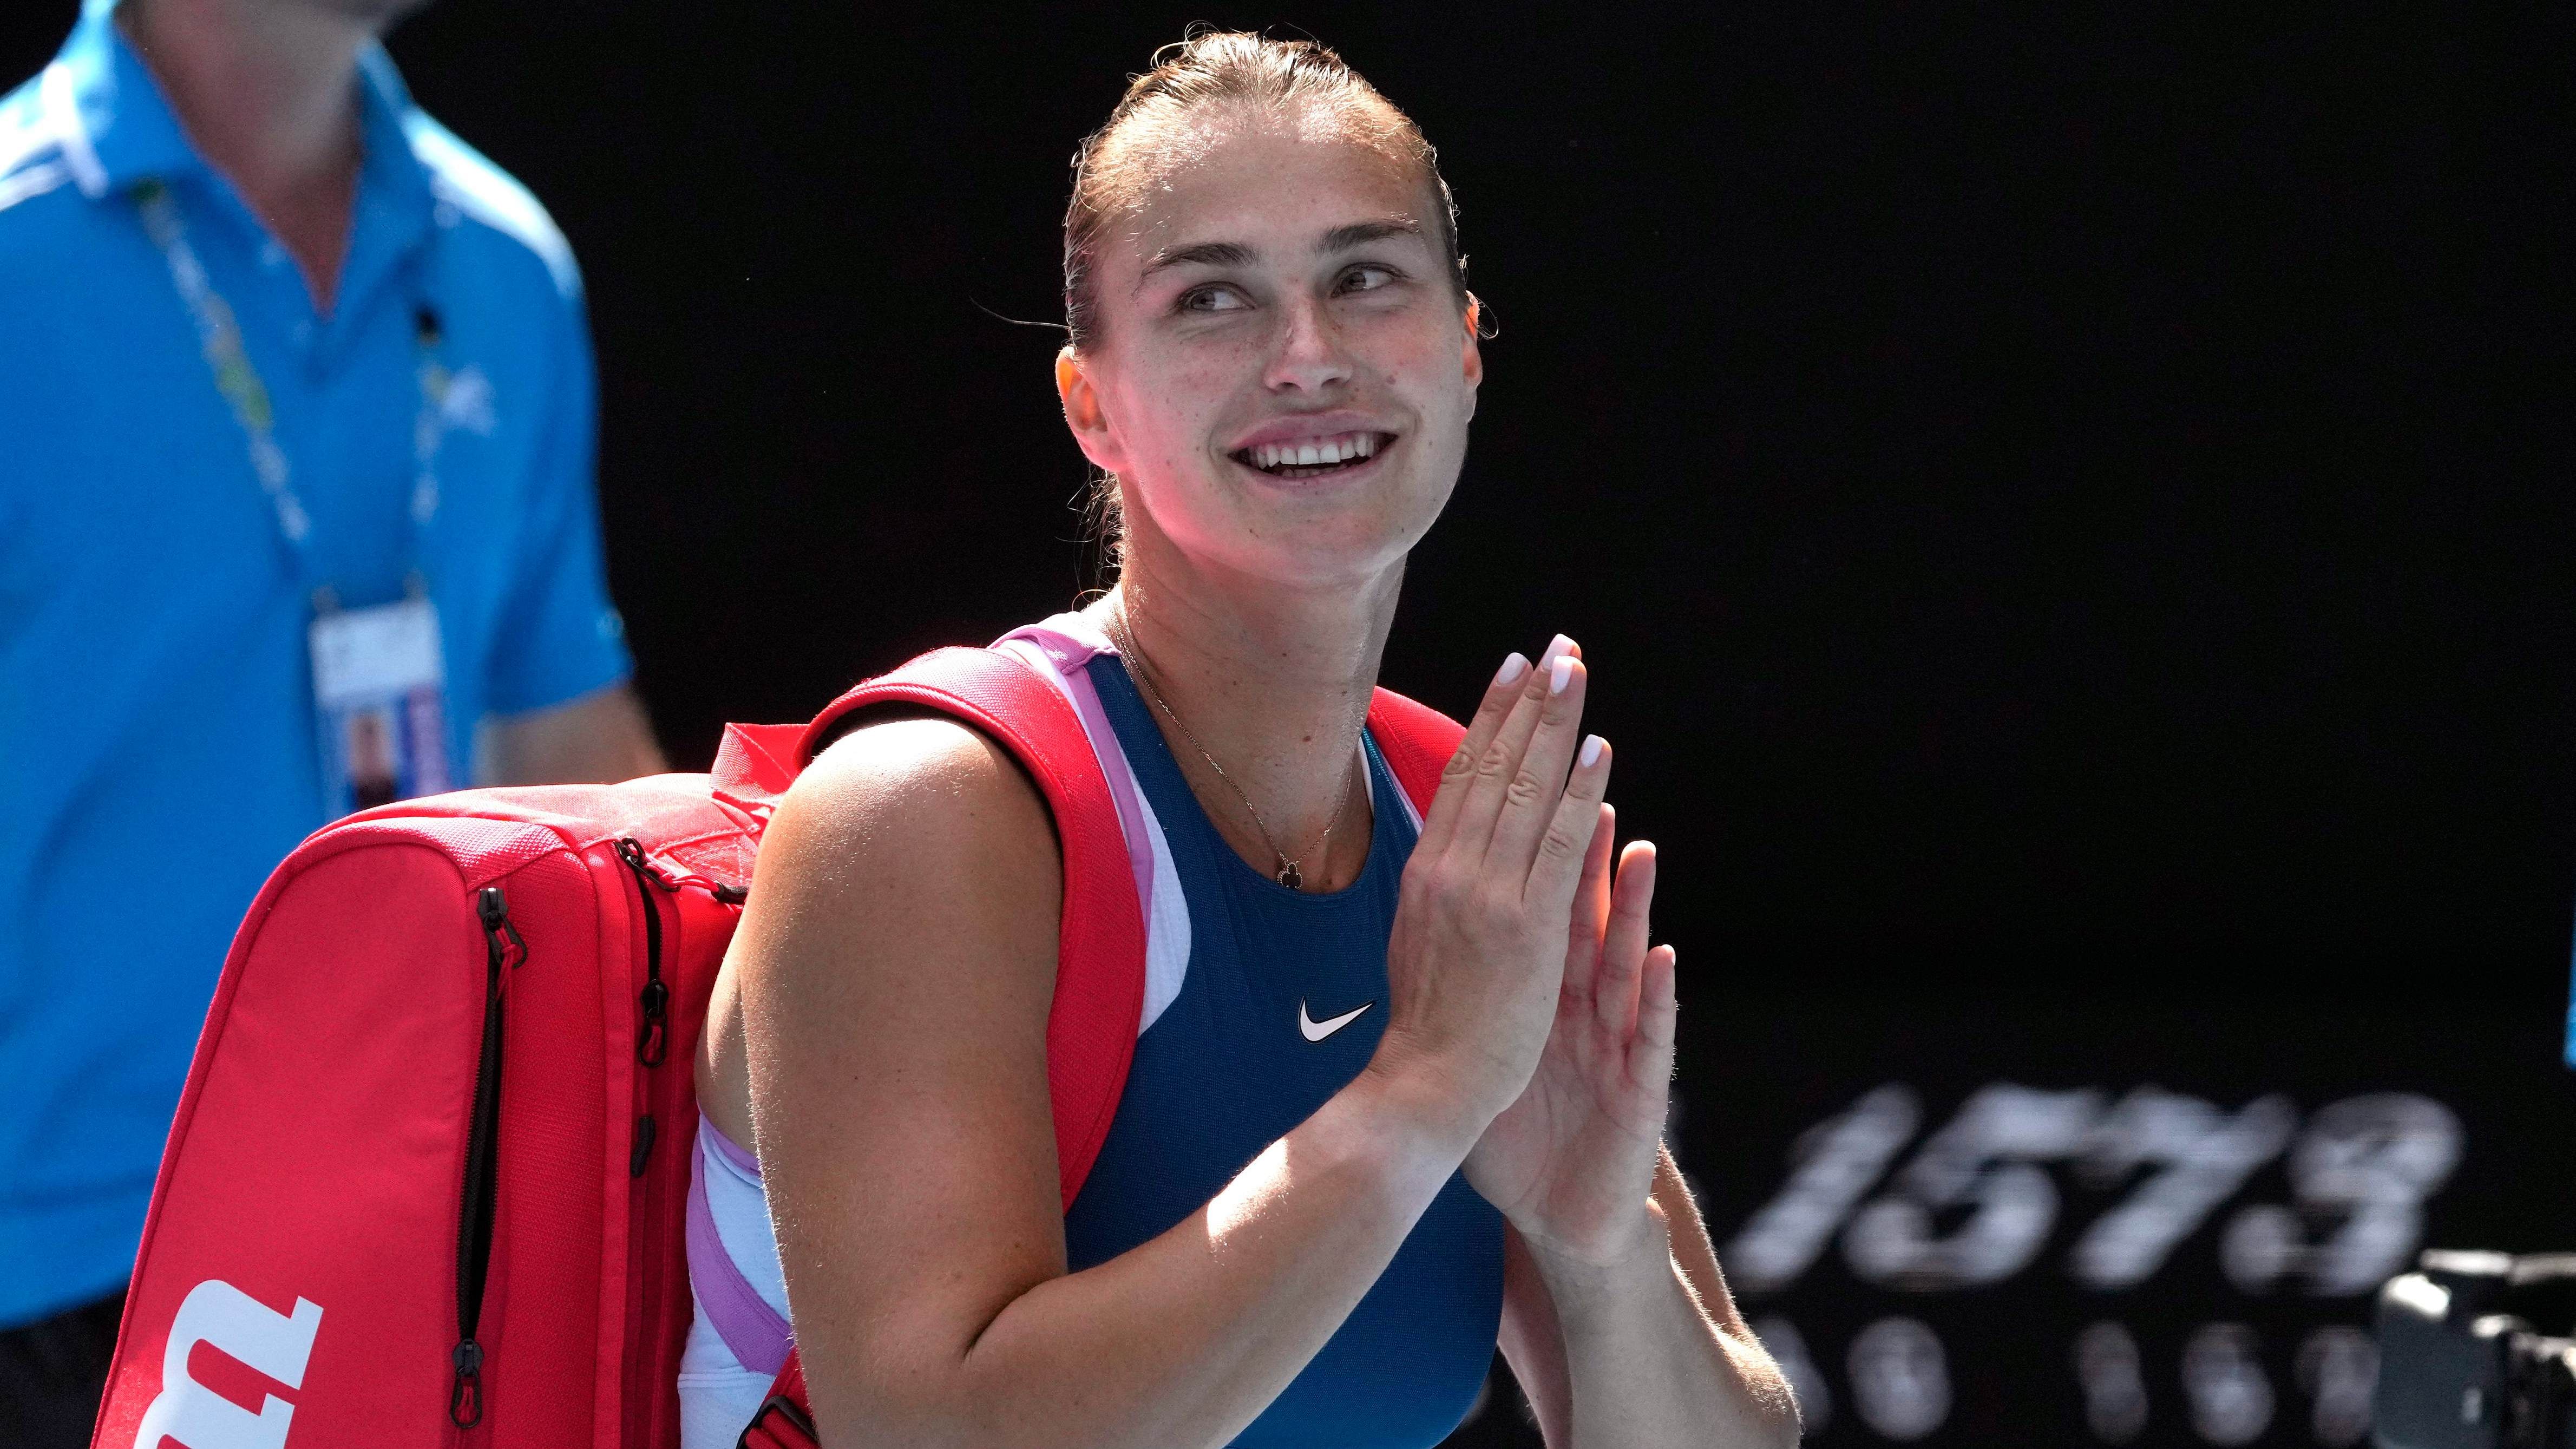 Aryna Sabalenka of Belarus reacts after defeating Elise Mertens of Belgium in their third round match at the Australian Open tennis championship in Melbourne. Credit: AP Photo